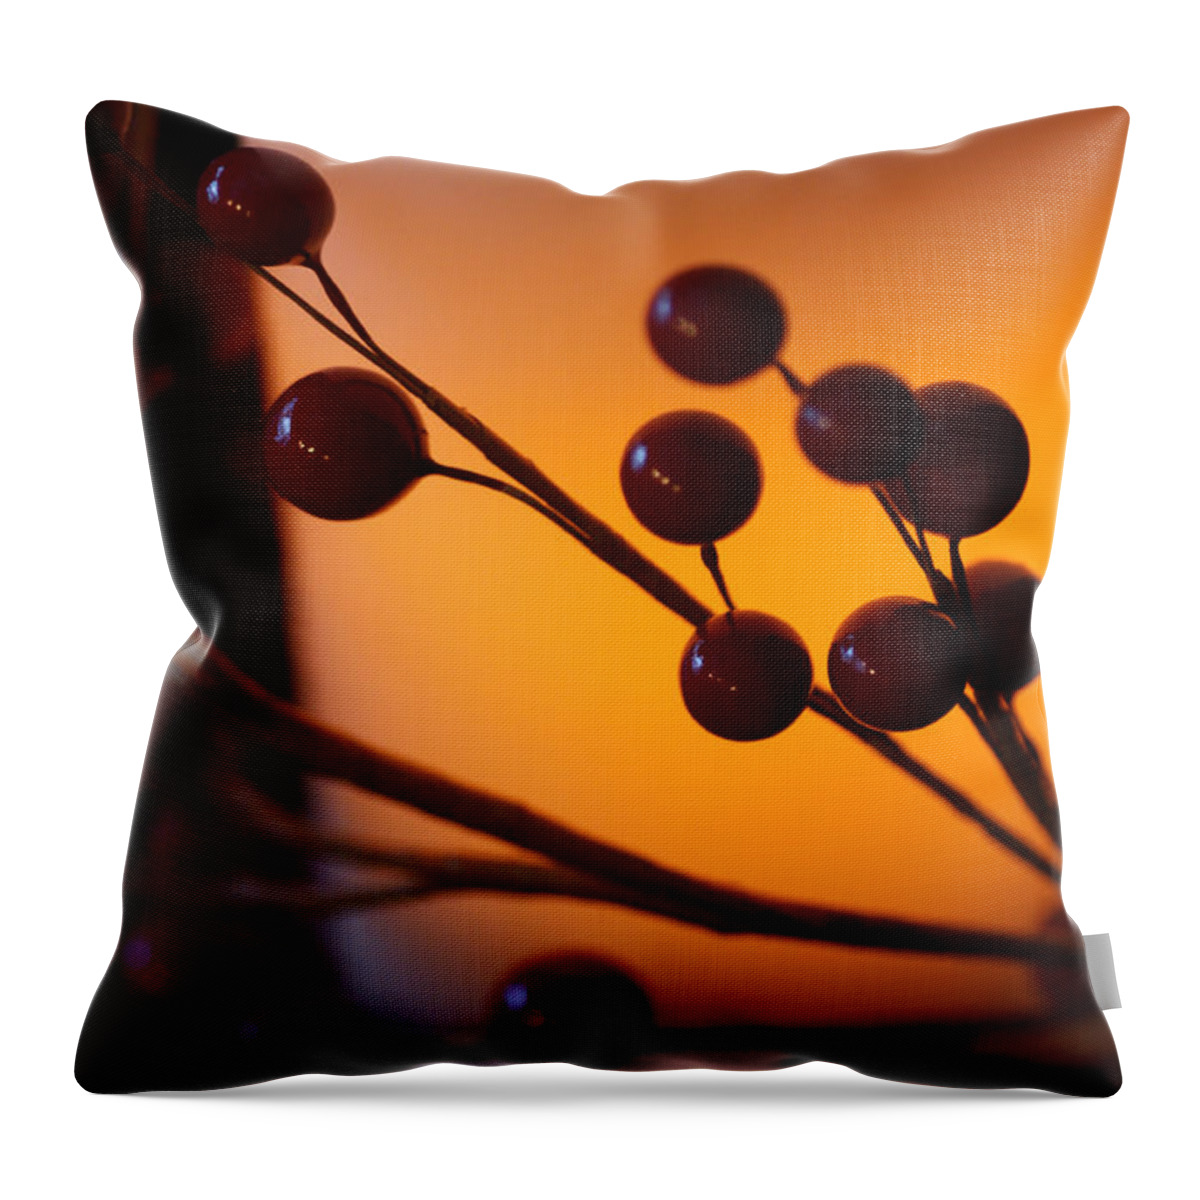 Holiday Throw Pillow featuring the photograph Holiday Warmth By Candlelight 1 by Linda Shafer